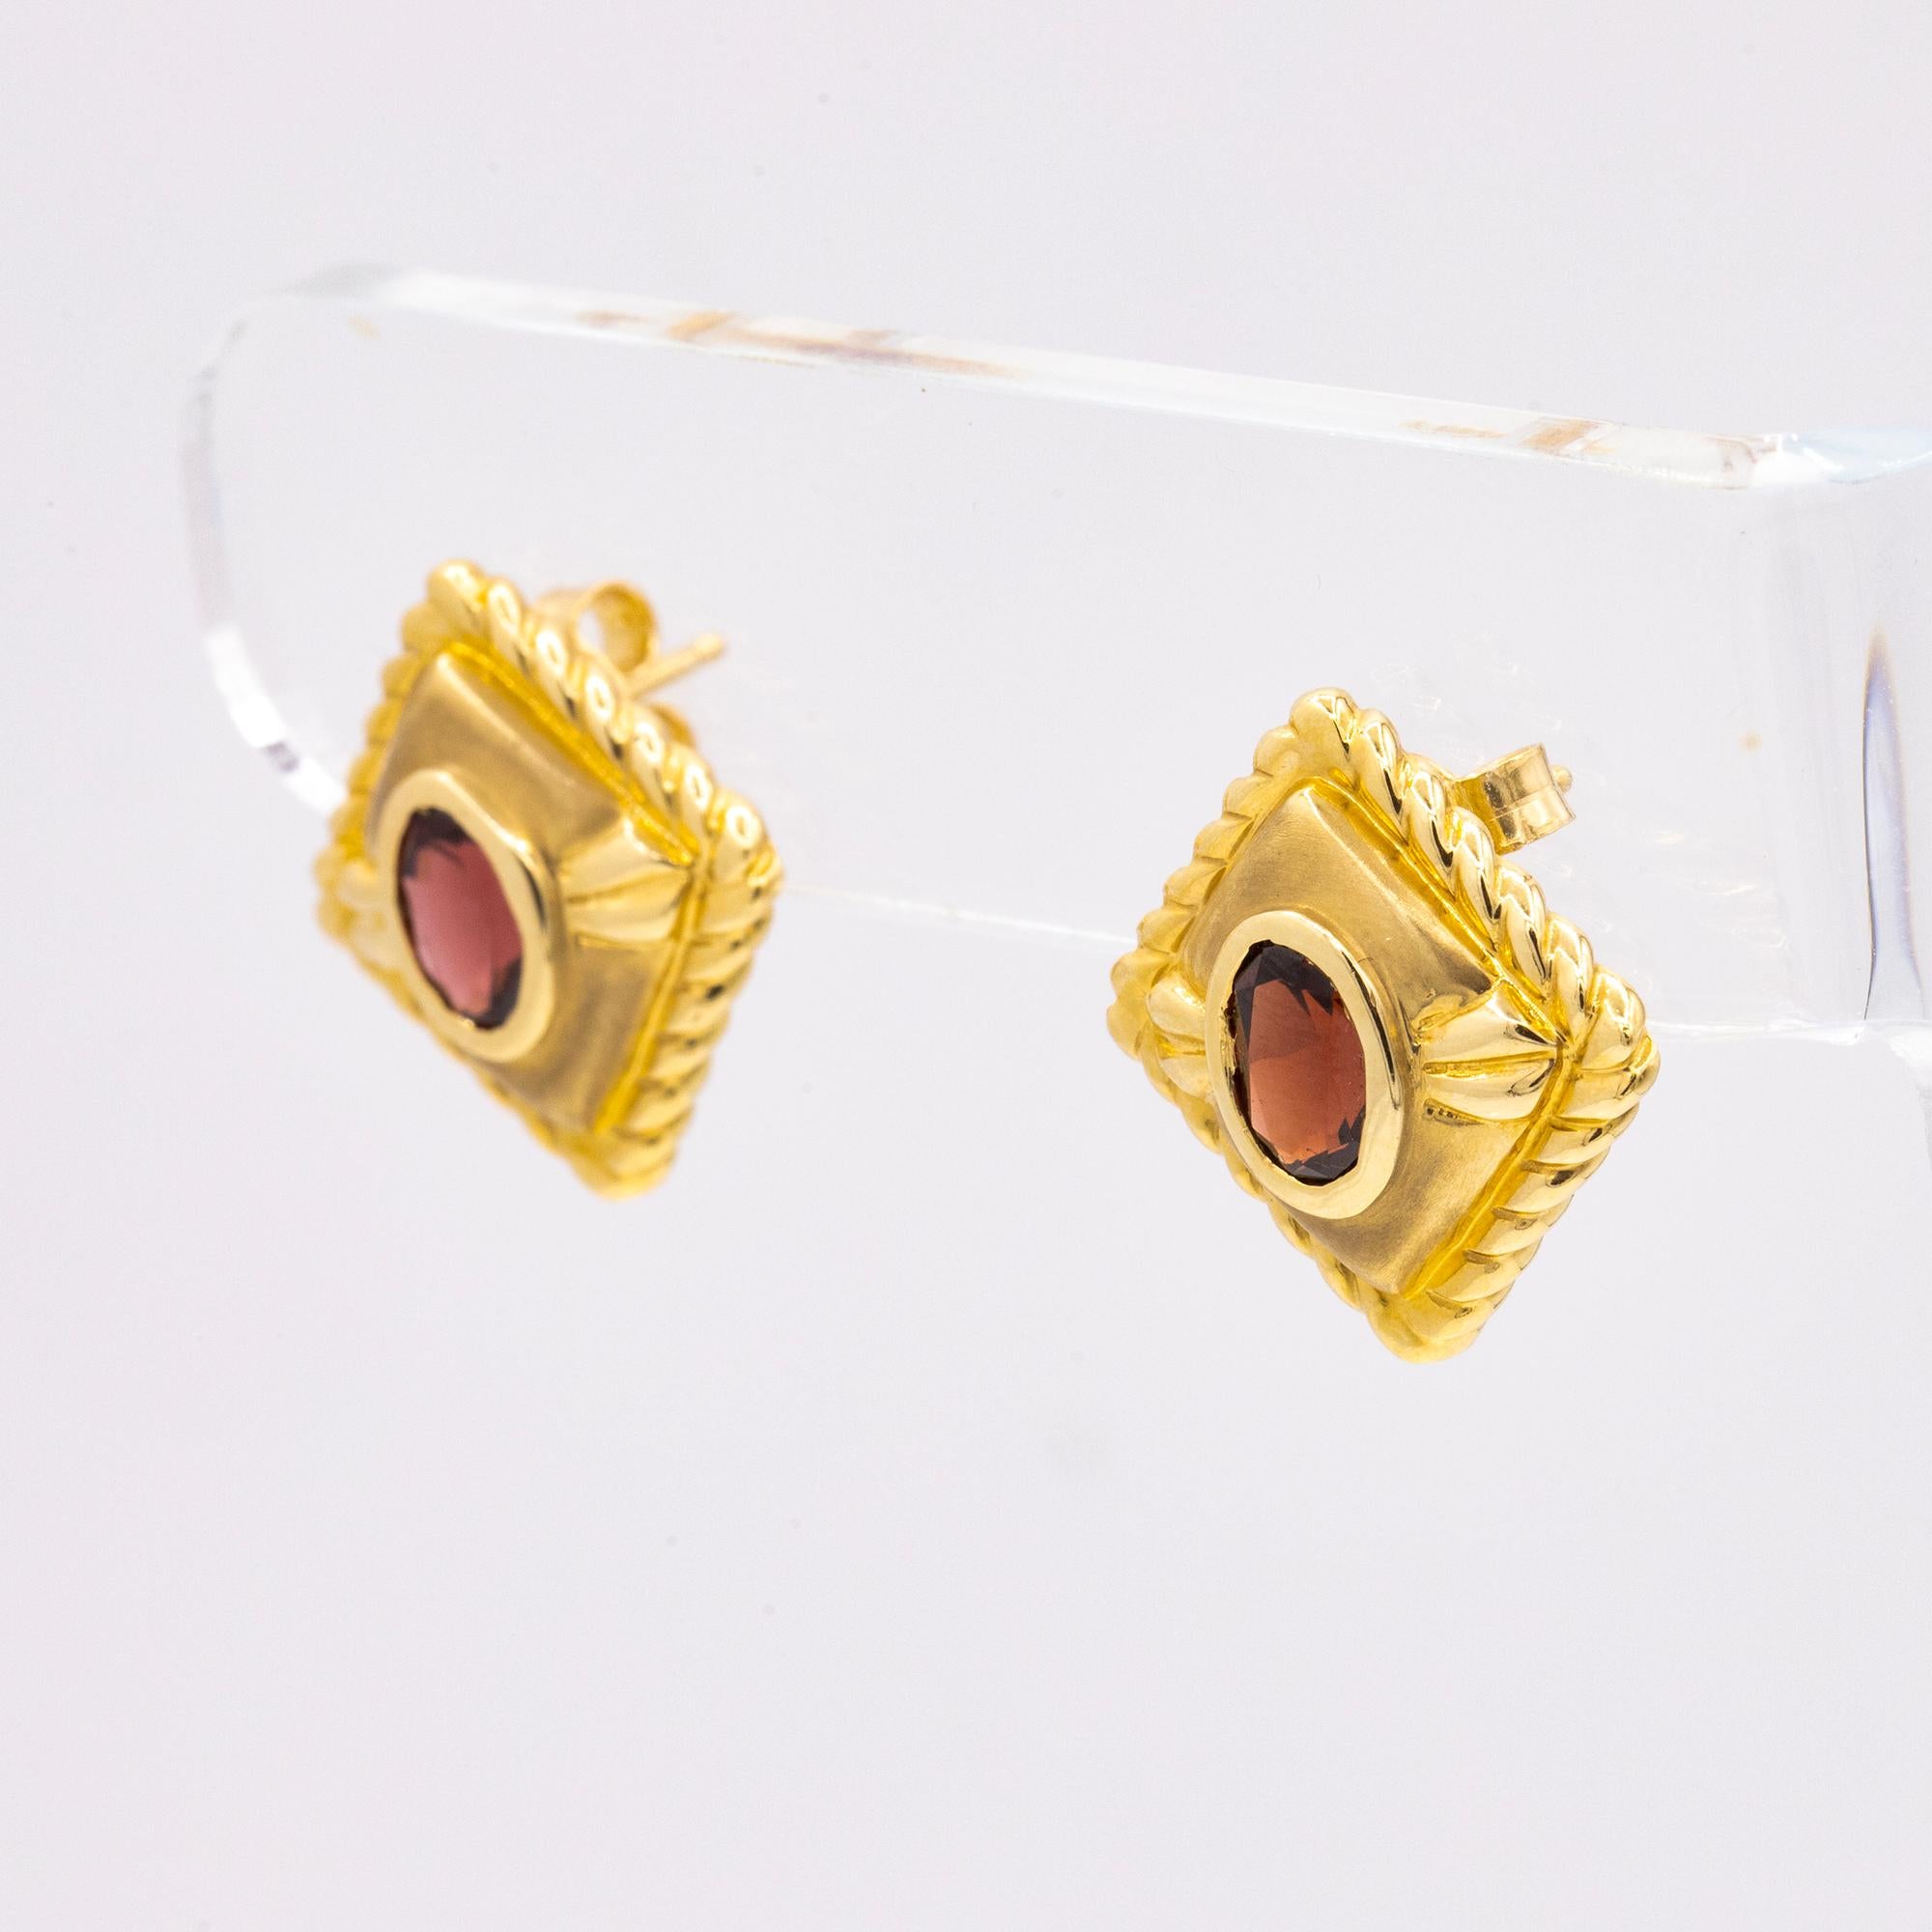 Vintage Earrings set in 14kt Yellow Gold. Bezel set design holding two expertly cut Oval shaped Garnets. These studs have a simple squared style with a beaded edging design. 